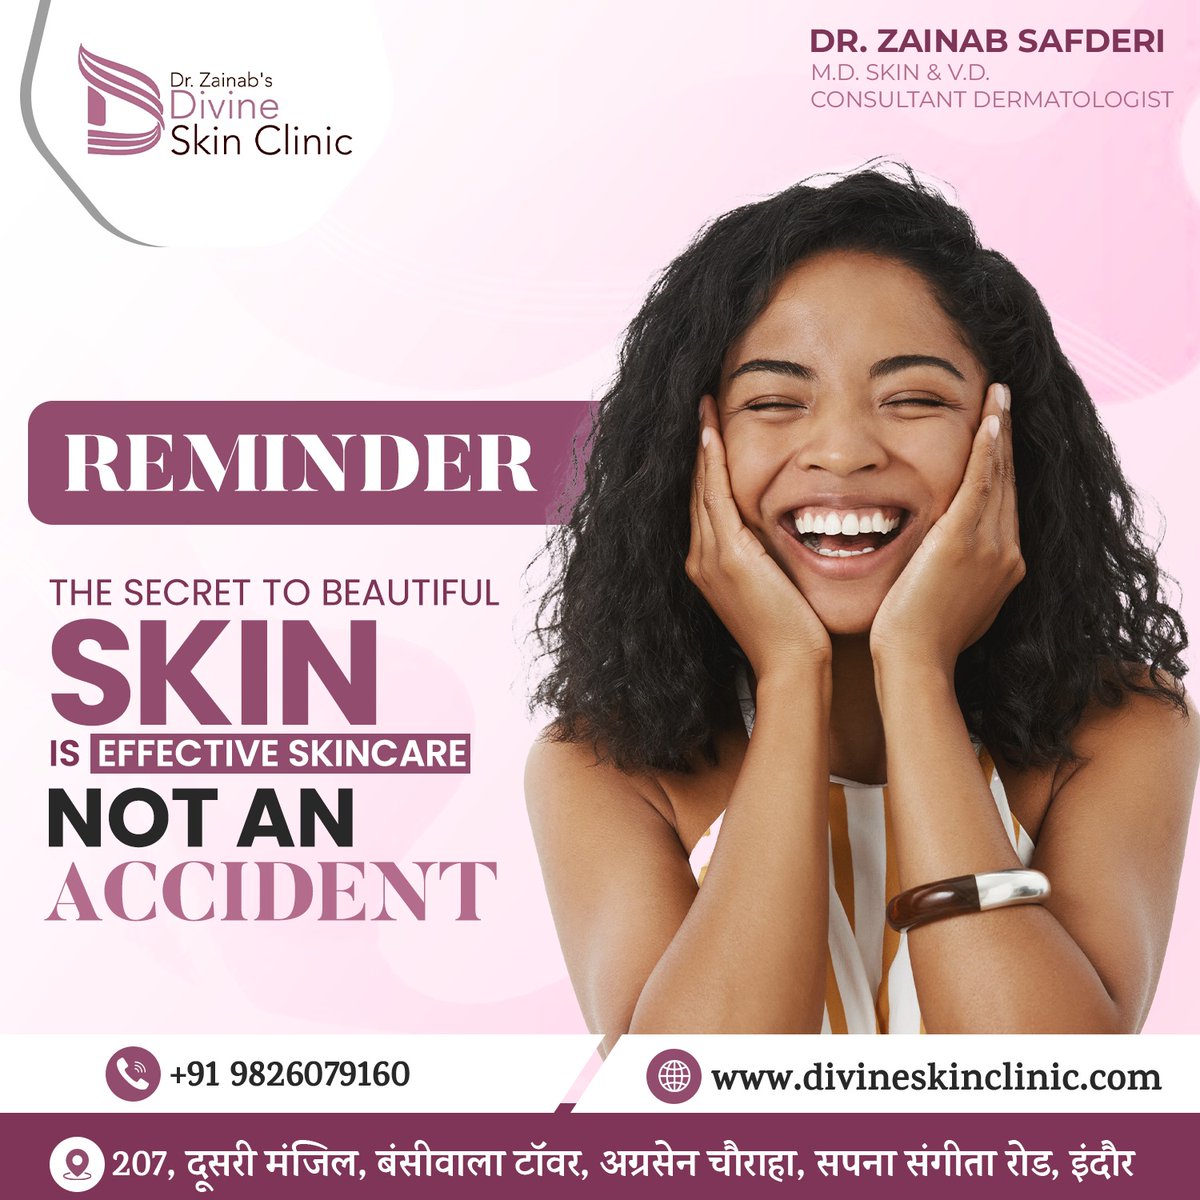 Beauty isn't luck, it's a journey of self-care.
Consult Today at #divineskinclinic 

Dr. Zainab Safderi
+91 9826079160

#DrZainabSafderi #drzainab #skinclinic #indorebestskinclinic #reminder #skincare #glow #skinglow #skinproblem #skininfection #dermarologist #selfcare #indore